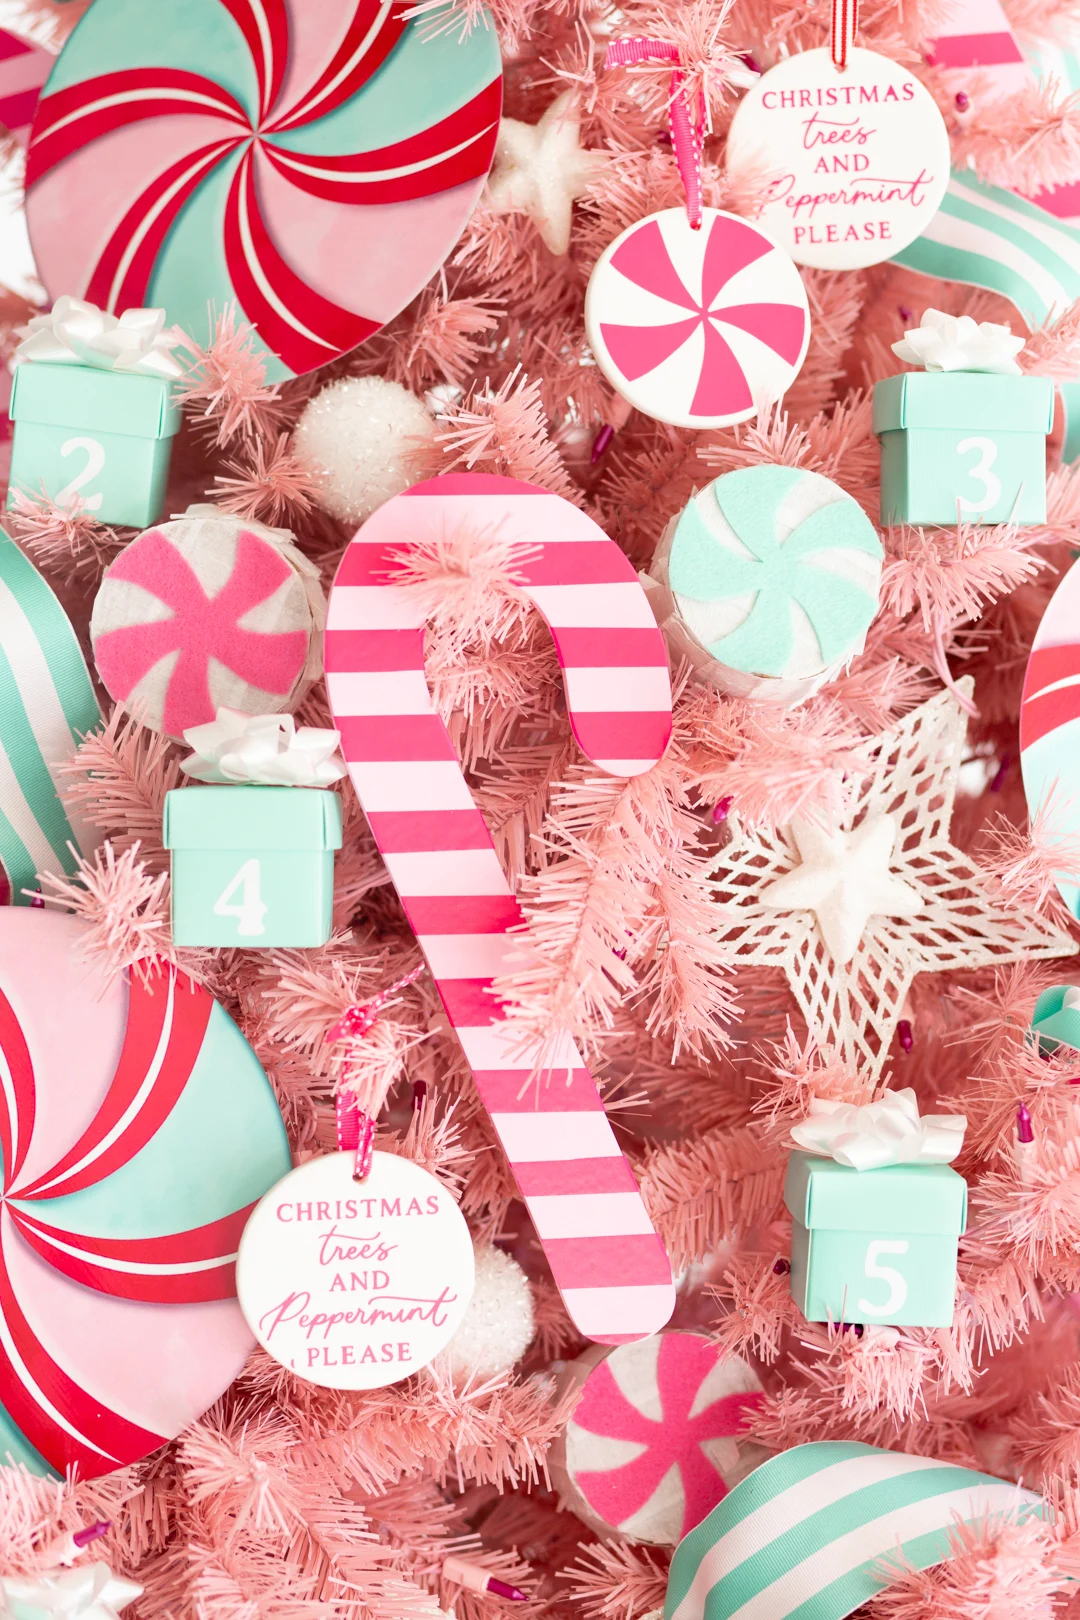 Pretty Christmas Gifts Under $50 for Her - Pink Peppermint Design